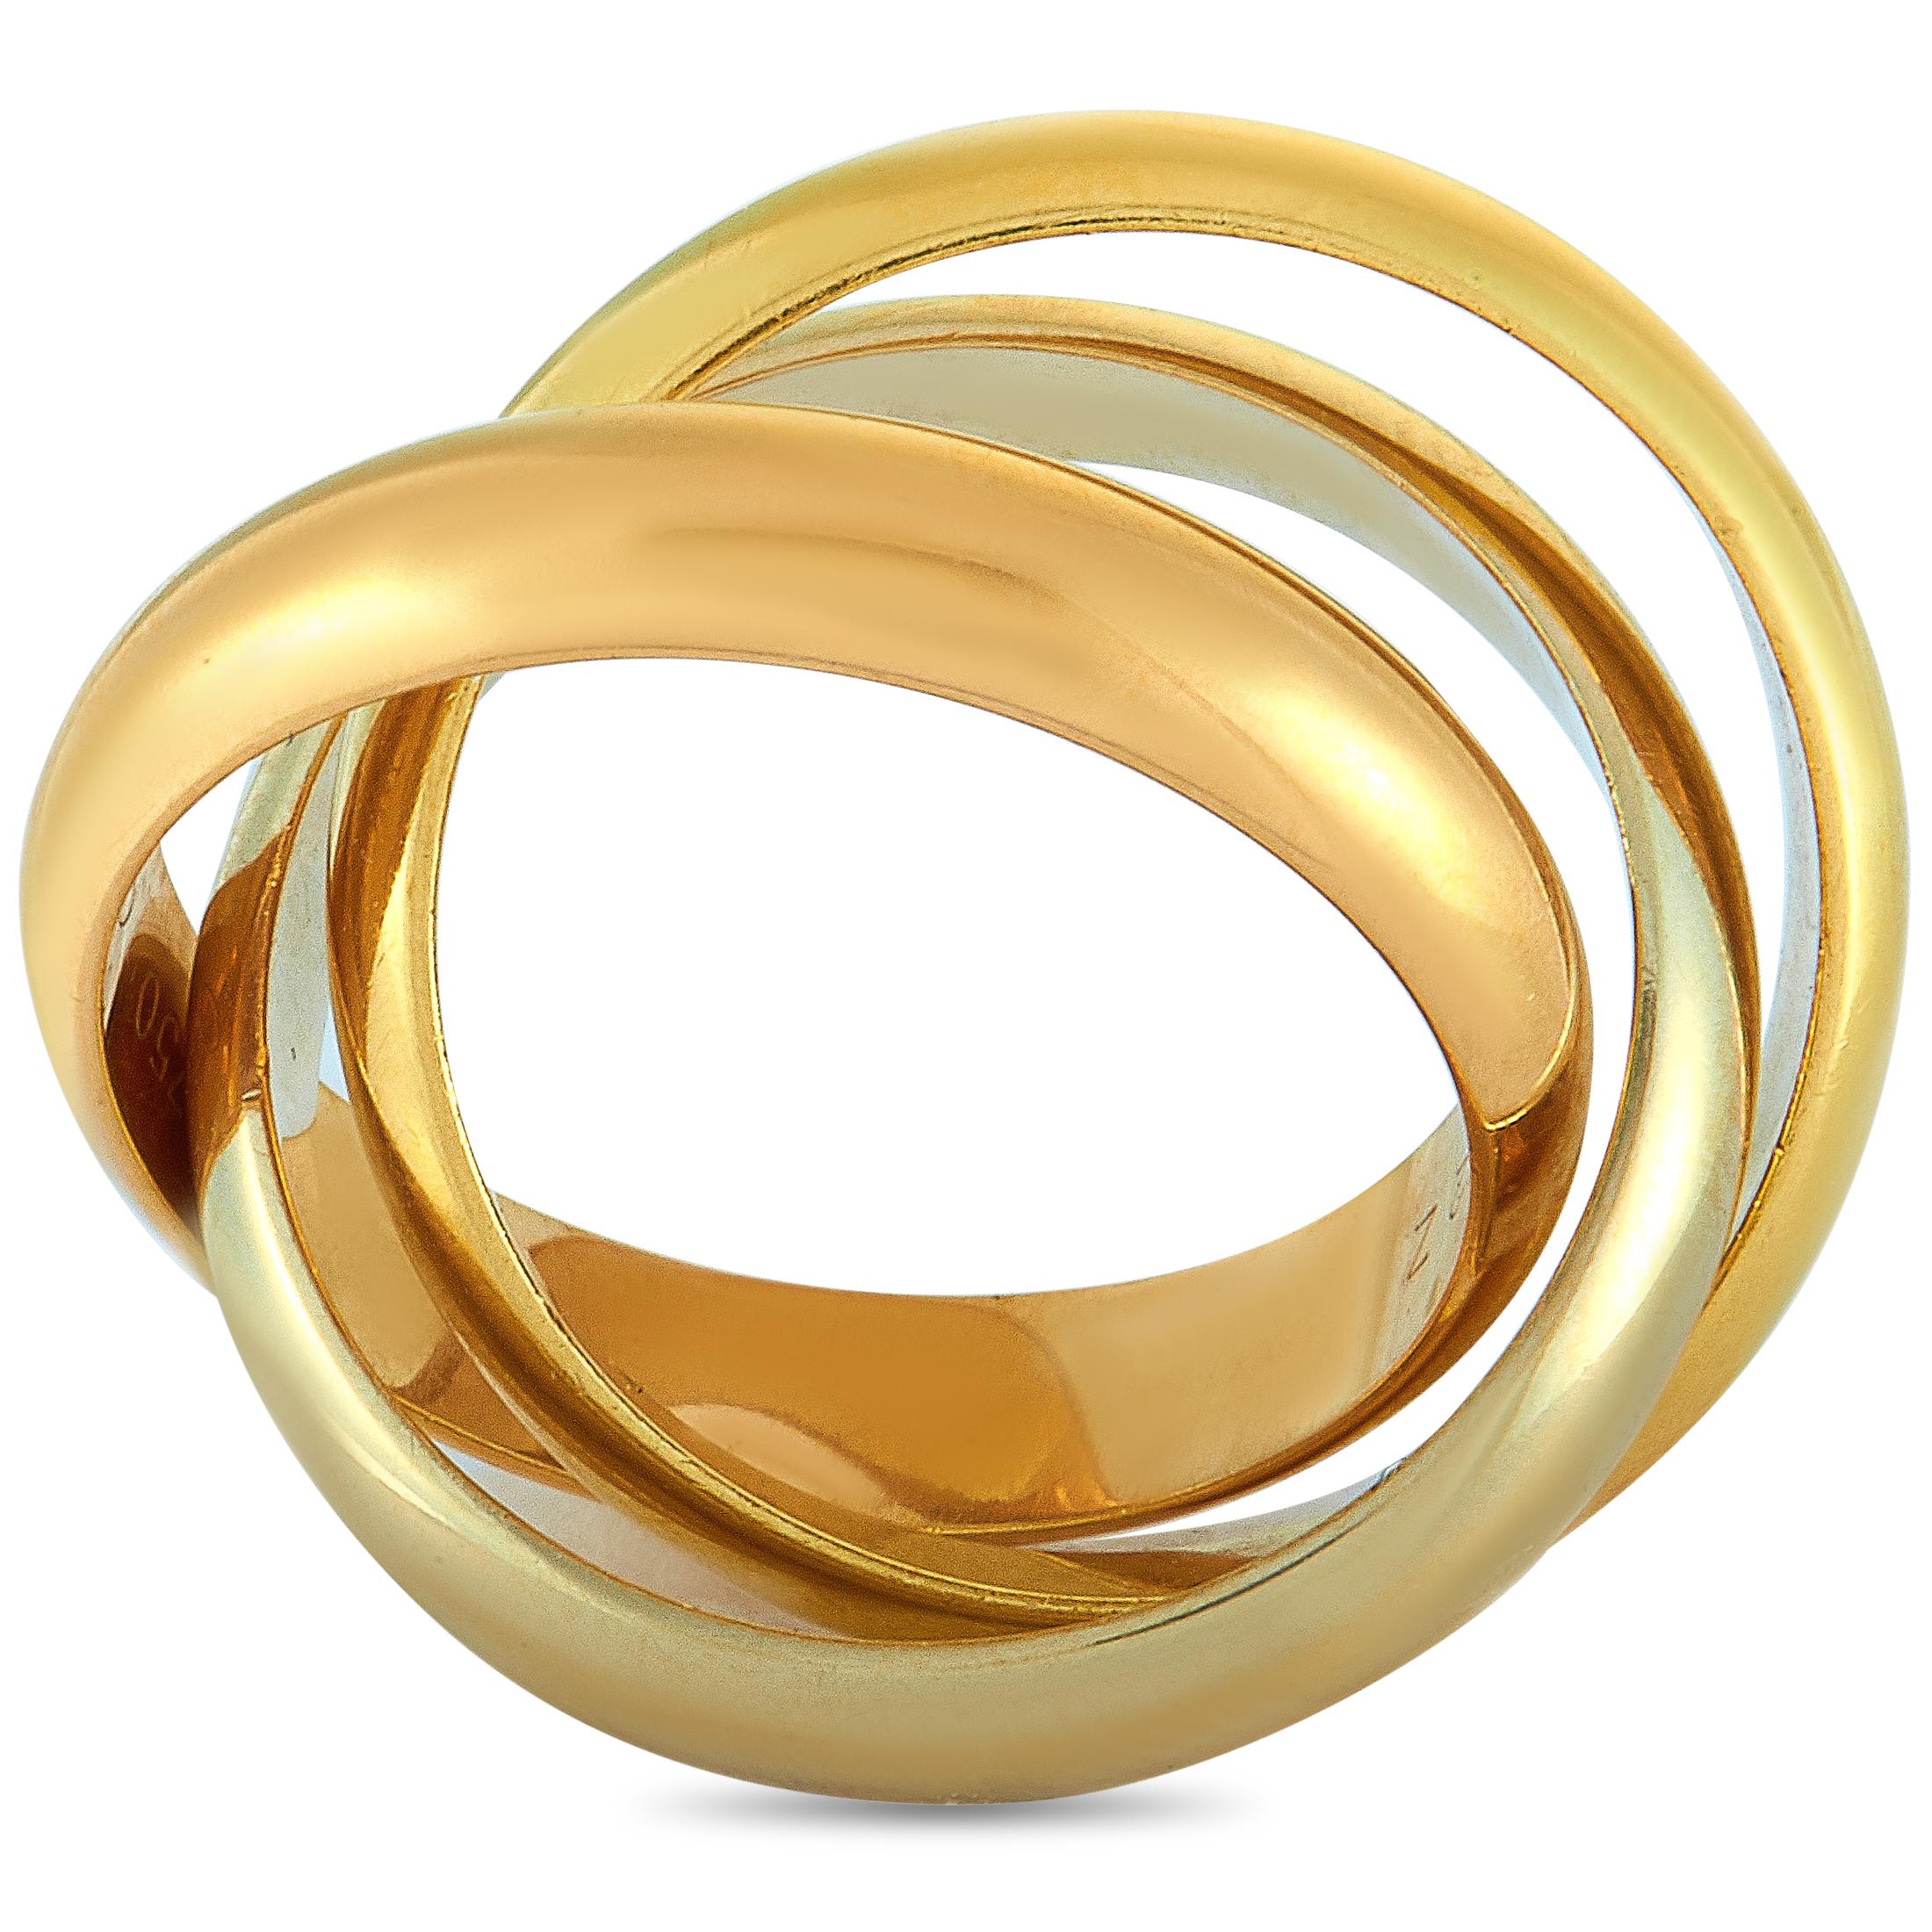 The Cartier “Trinity” ring is made out of 18K yellow, white, and rose gold and weighs 15 grams, boasting band thickness of 10 mm.

This item is offered in estate condition and includes the manufacturer’s box.
Ring Size: 6.5